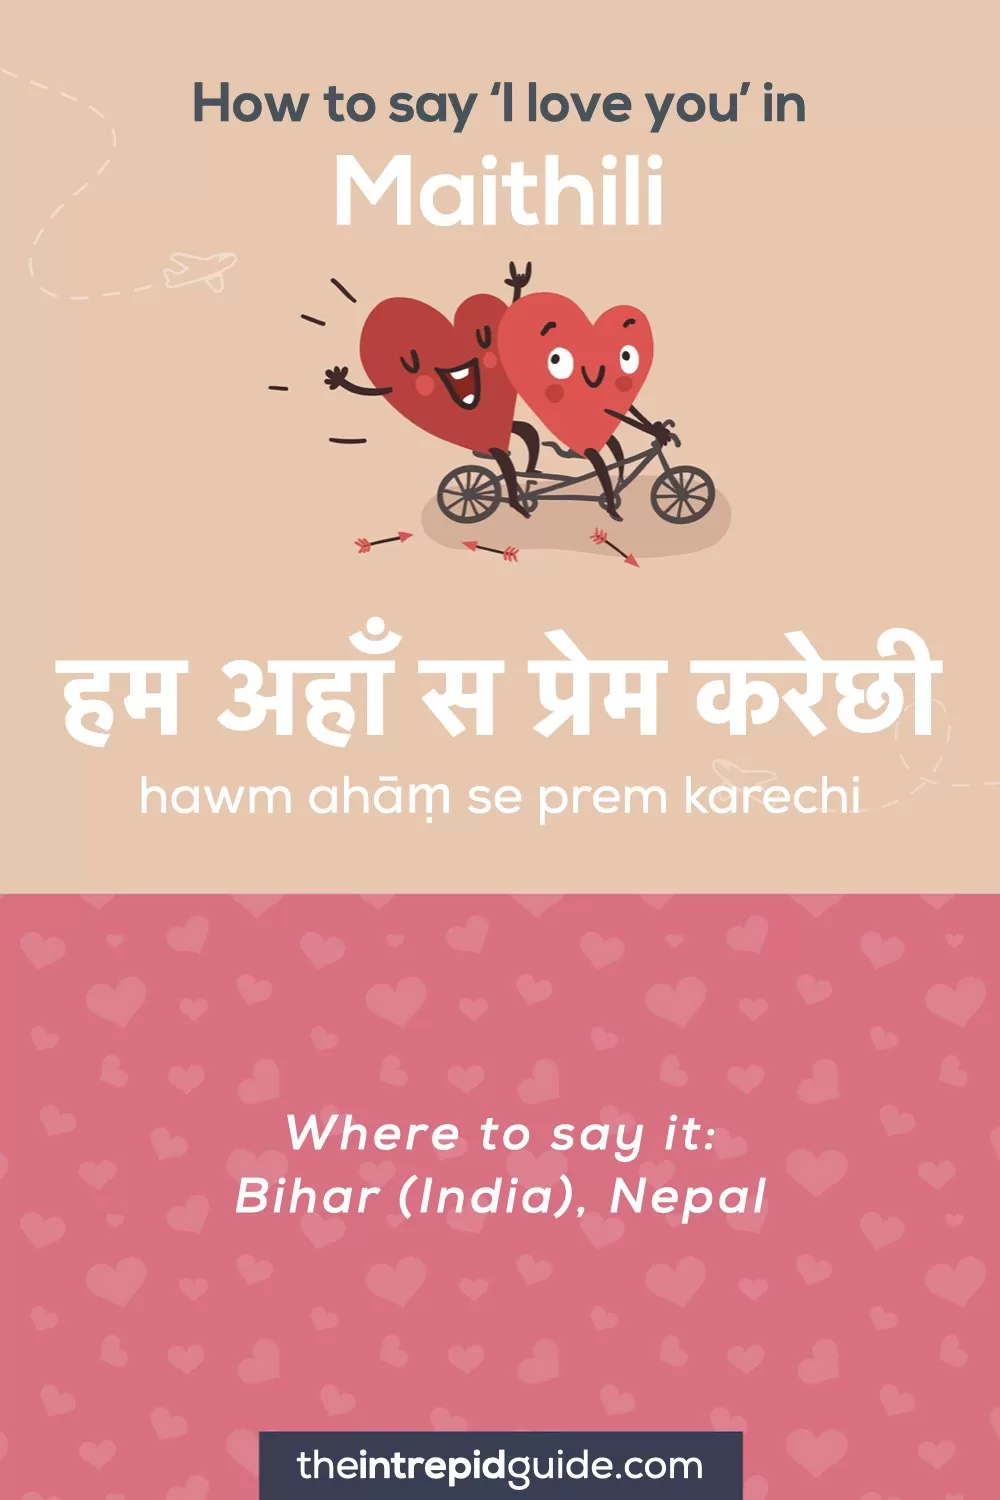 How to say I love you in different languages - Maithili - हम अहाँ स प्रेम करेछी